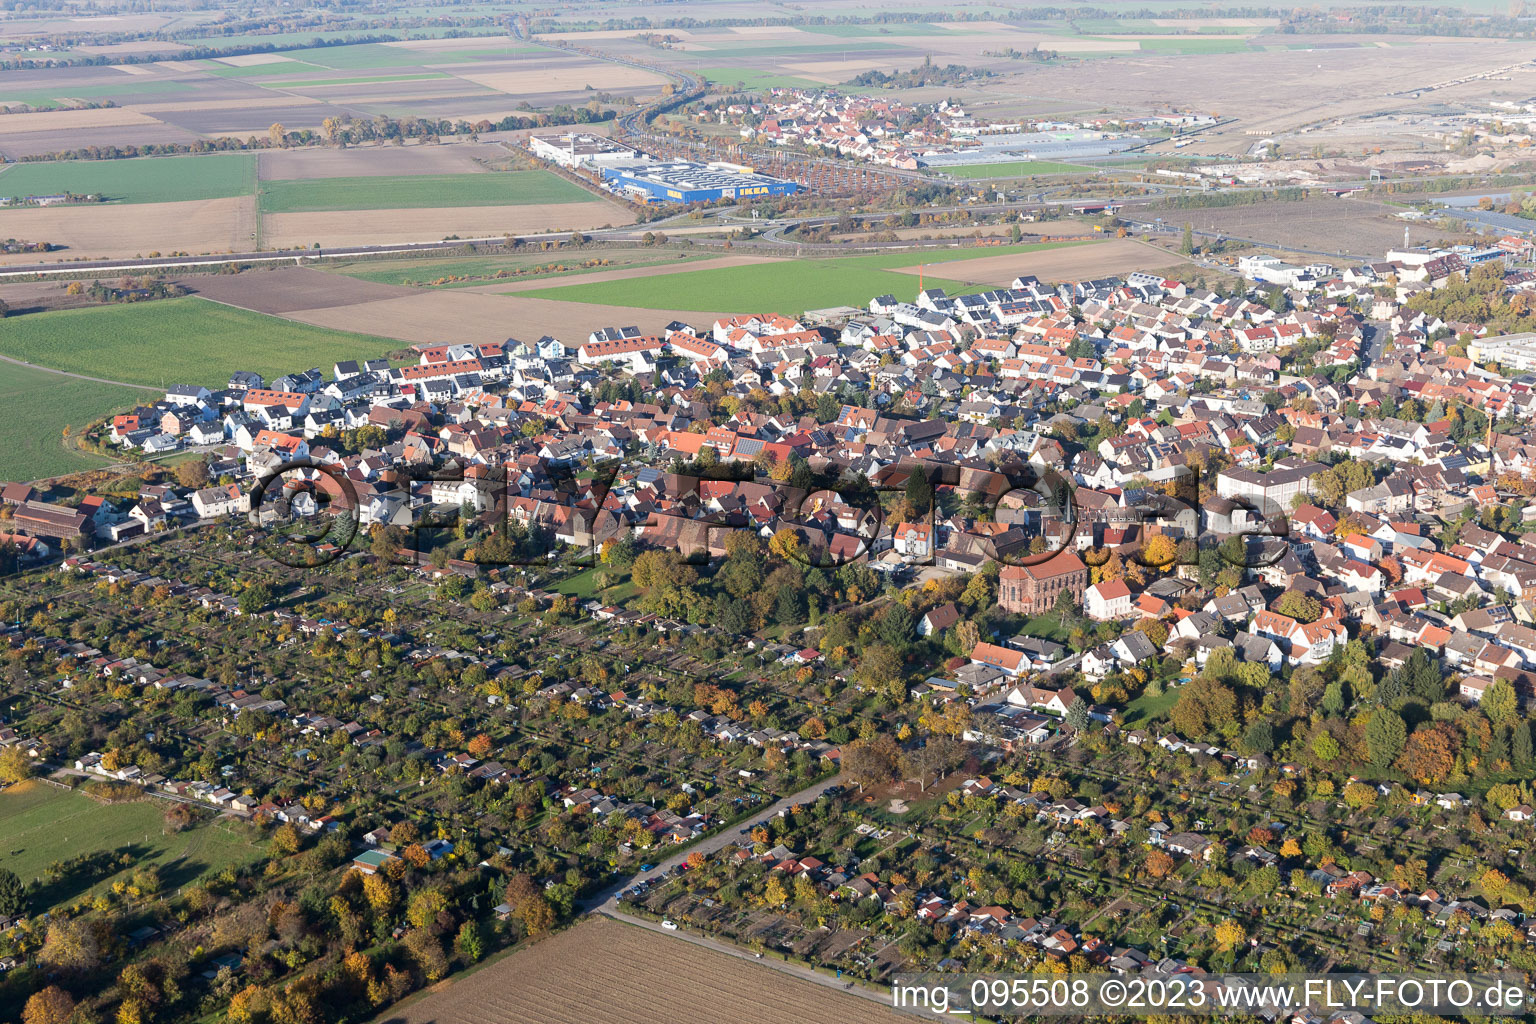 District Sandhofen in Mannheim in the state Baden-Wuerttemberg, Germany from above